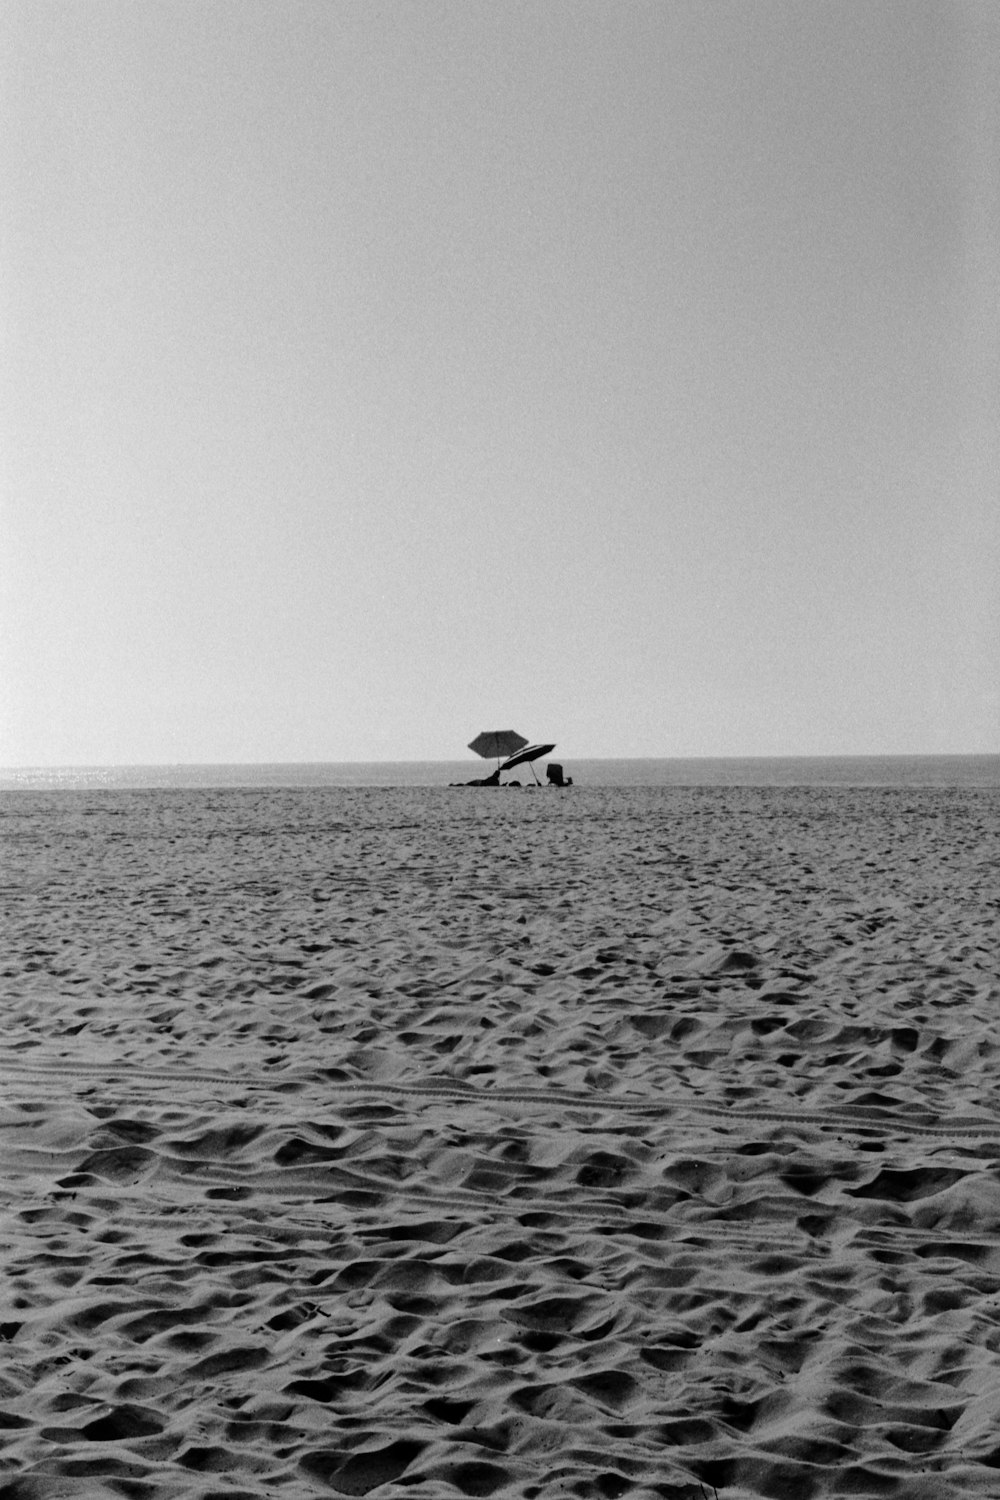 a black and white photo of a plane flying over a beach